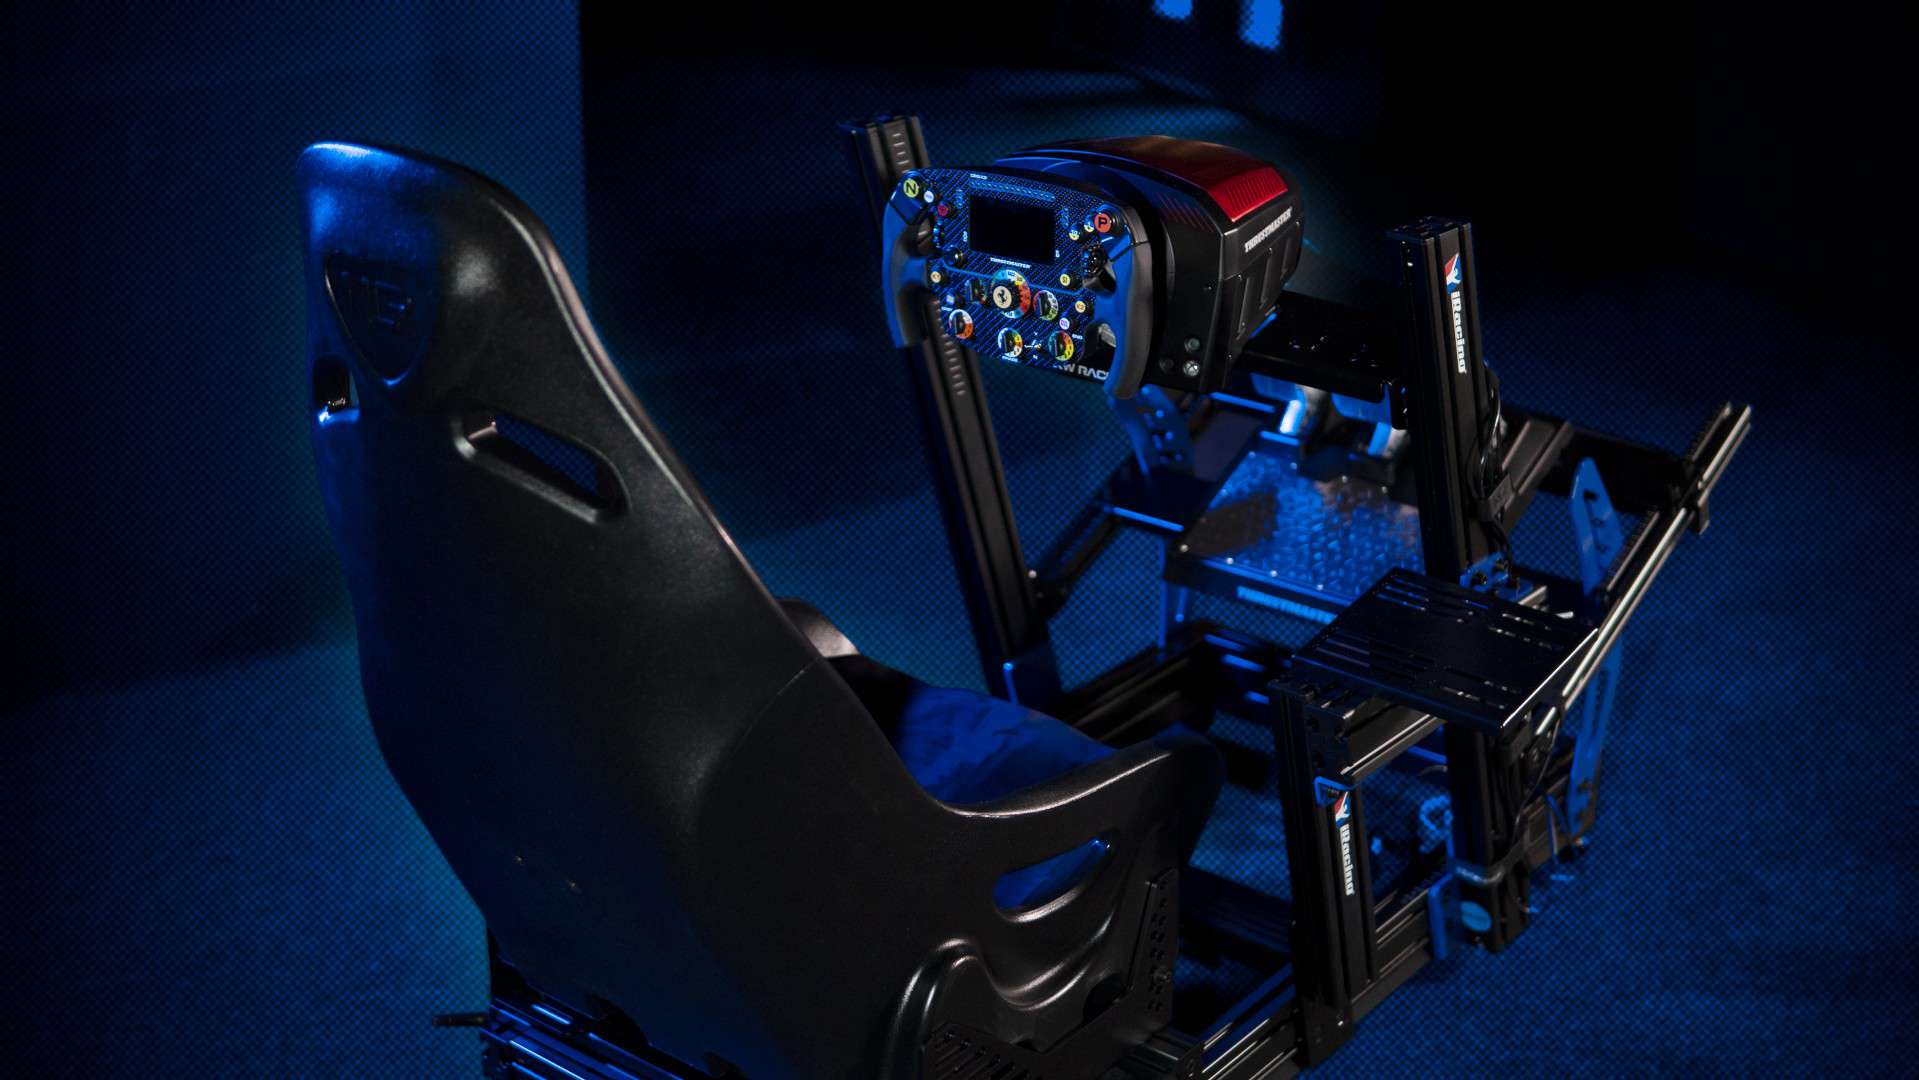 Next Level Racing F-GT Racing Simulator Cockpit. Formula and GT racing  simulator cockpit compatible with Thrustmaster, Fanatec, Moza Racing on PC